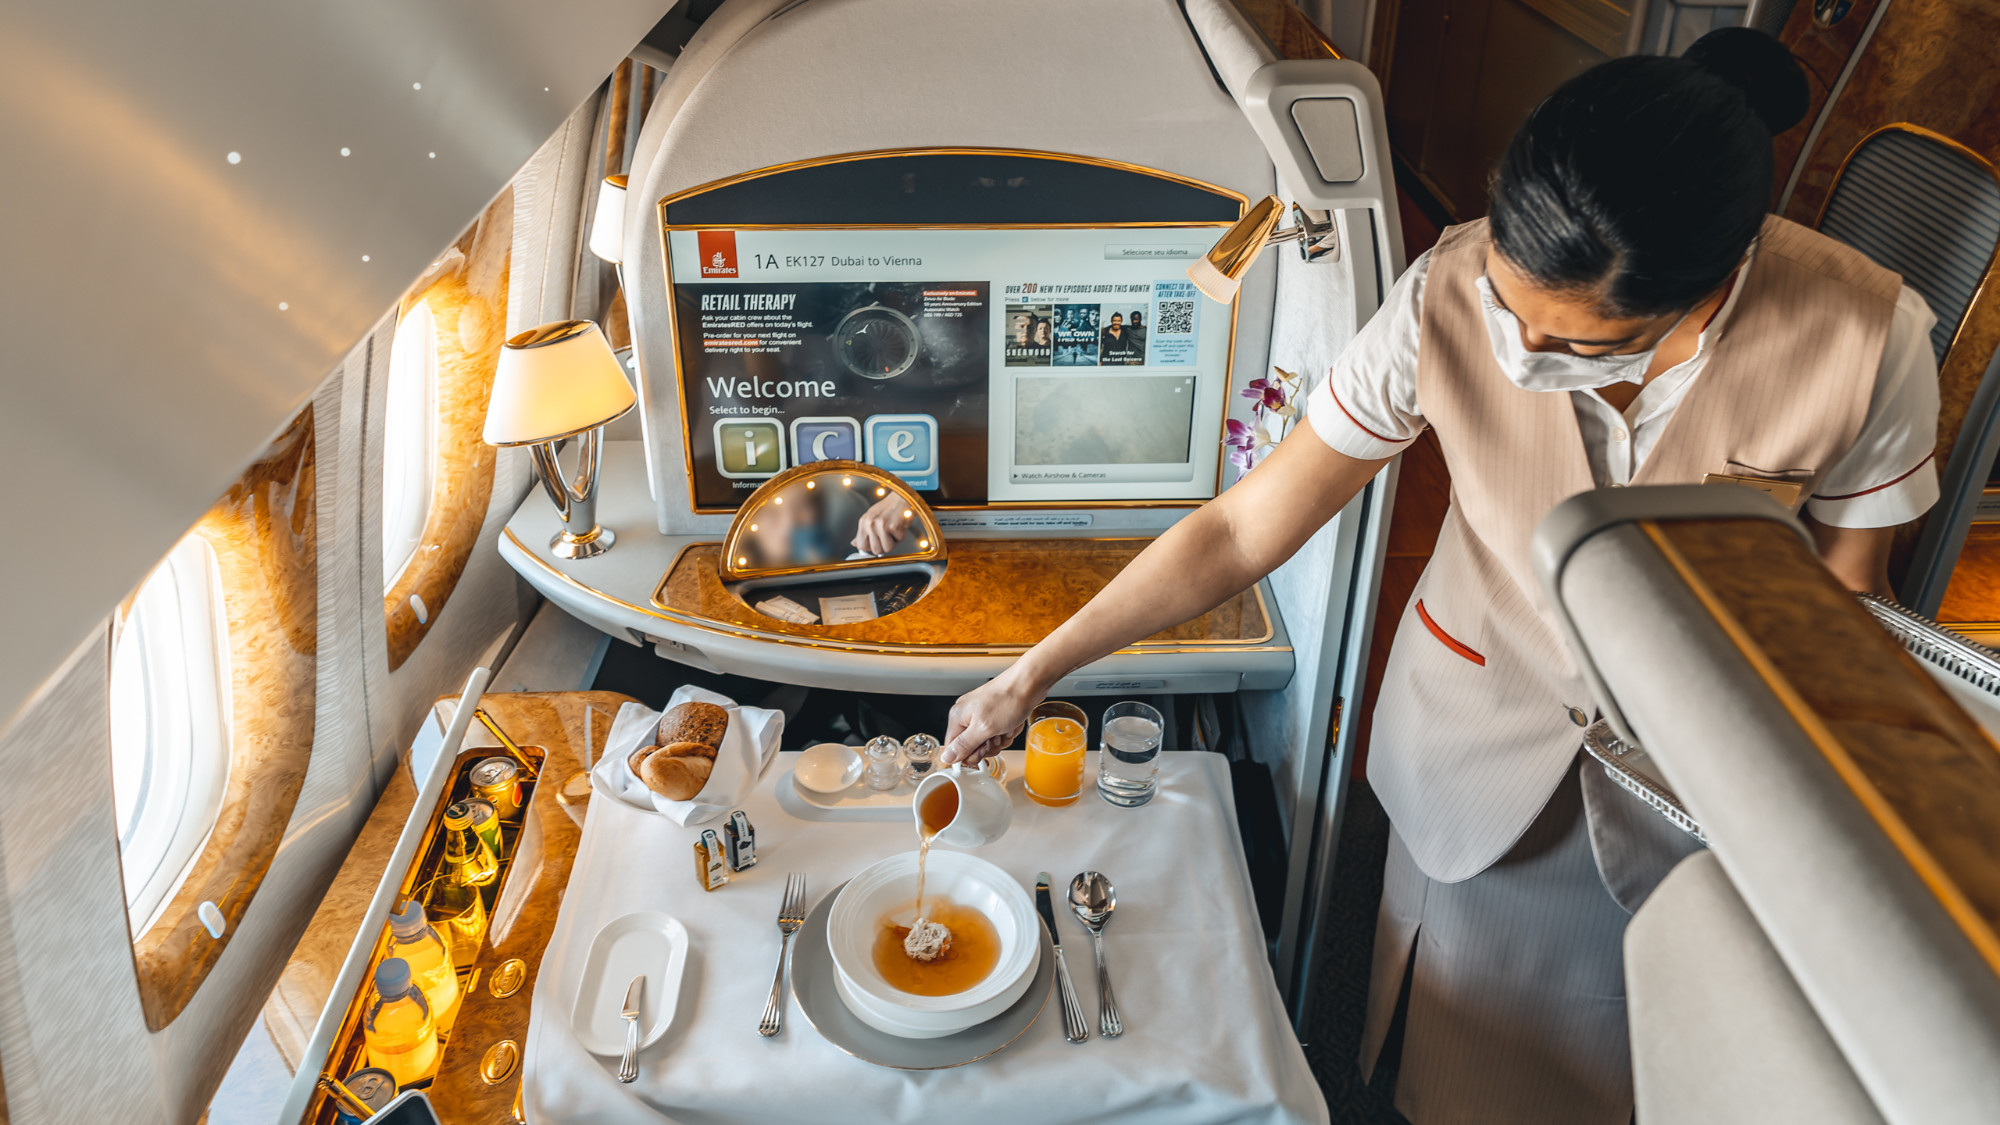 Emirates Boeing 777 First Class soup